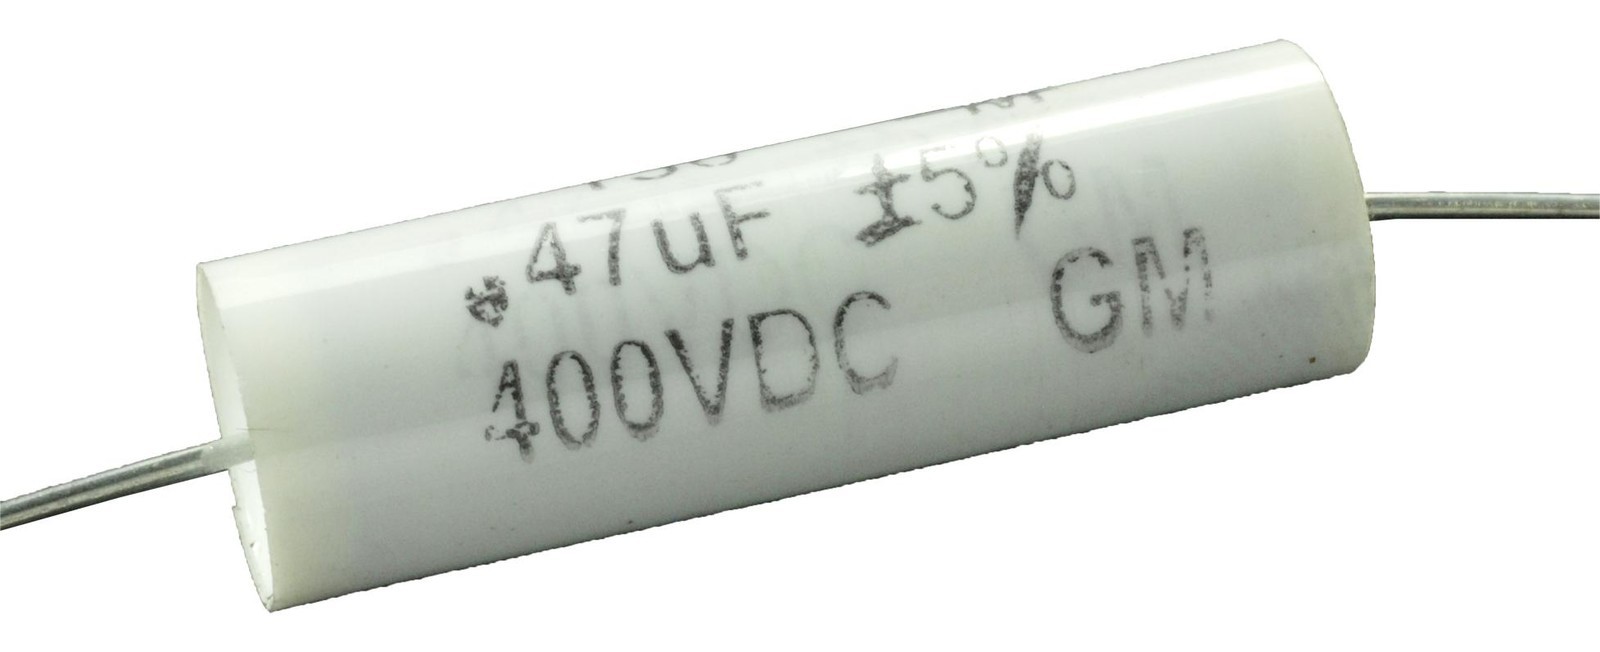 Cornell Dubilier 150474J400Lf Capacitor Polyester Film 0.47Uf, 400V, 10%, Axial